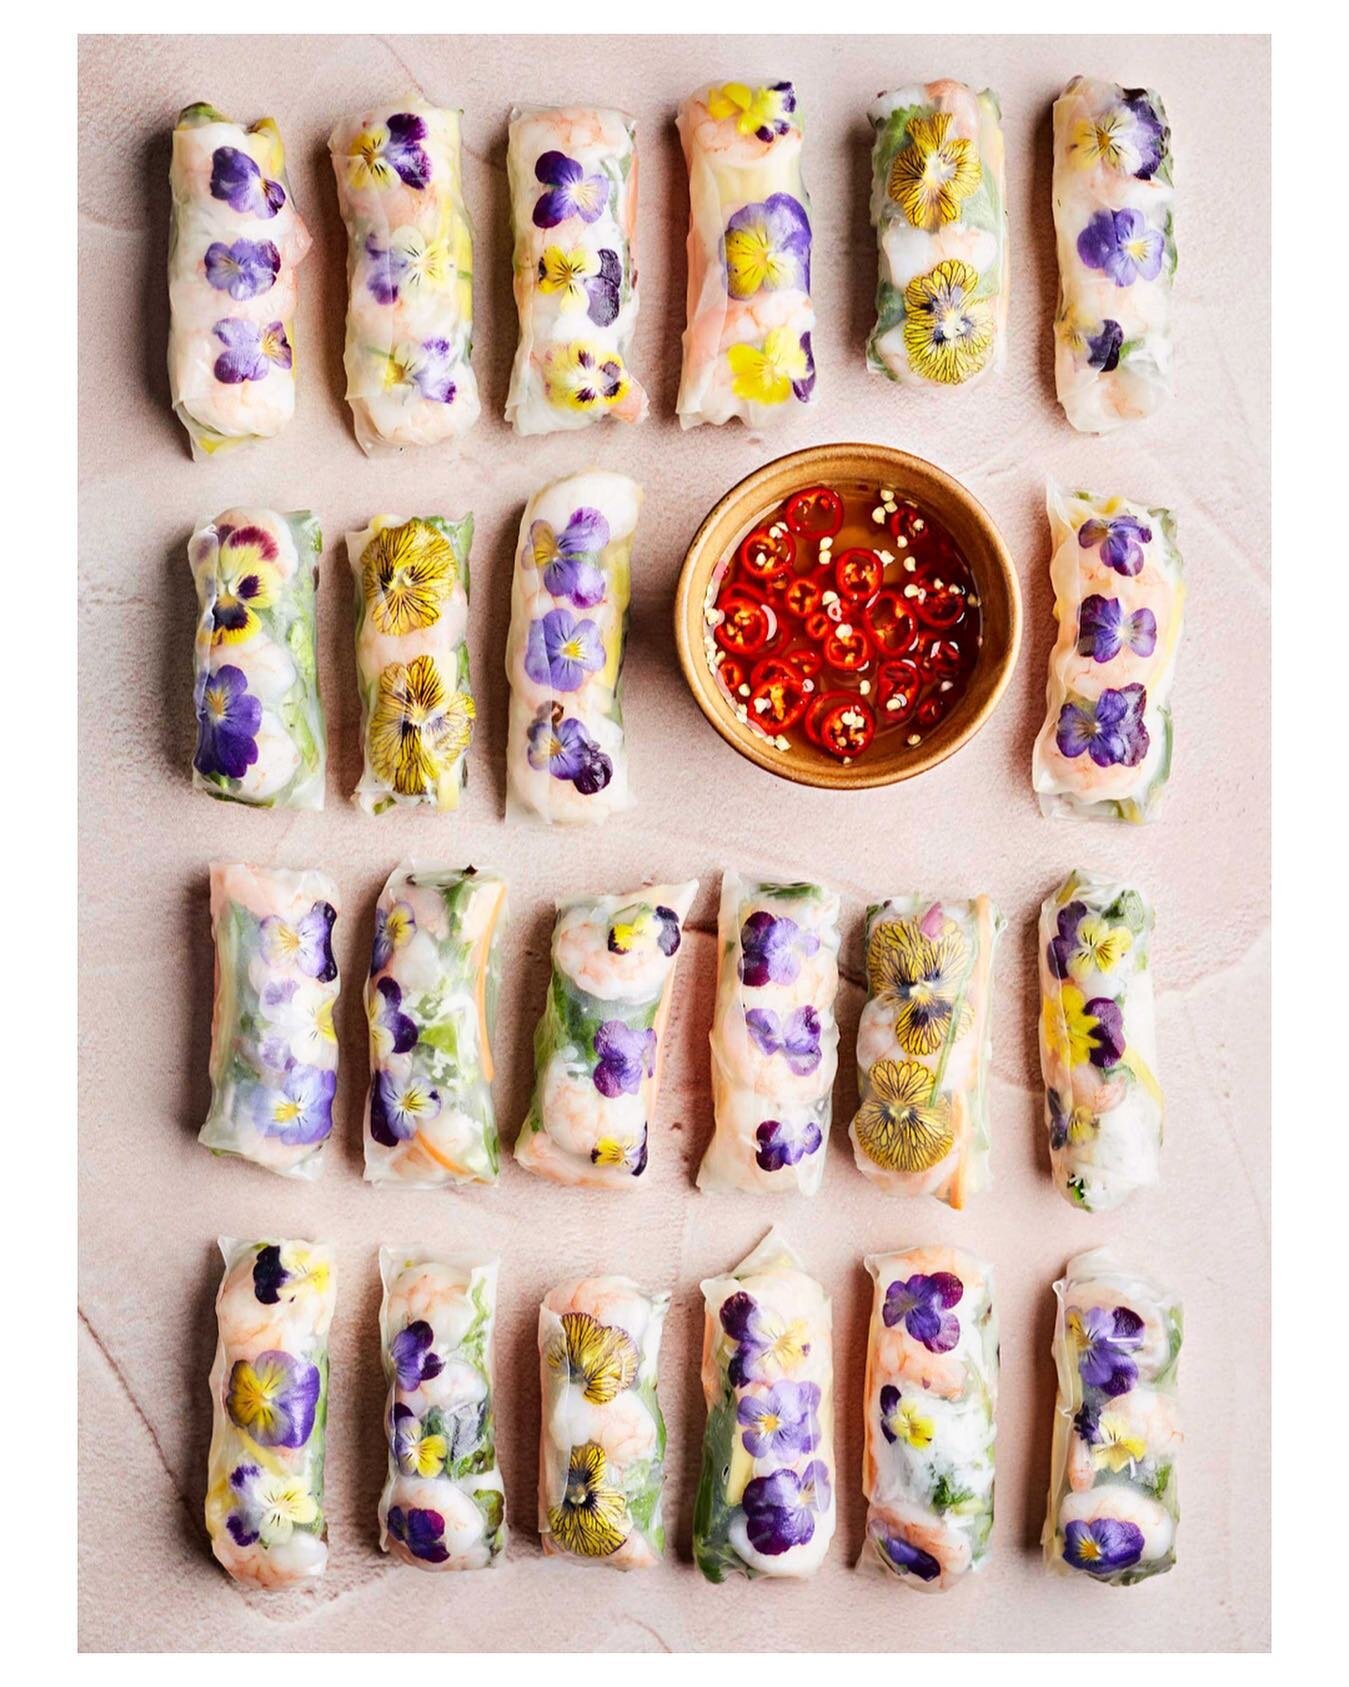 Vietnamese summer rolls by @theedibleflower shot for their gorgeous book The Edible Flower A modern Guide to Growing, Cooking &amp; Eating Edible Flowers

You can watch Erin makes these on catch-up @irelandamvmtv 🤩

#foodphoto #vietnamese #recipe #c